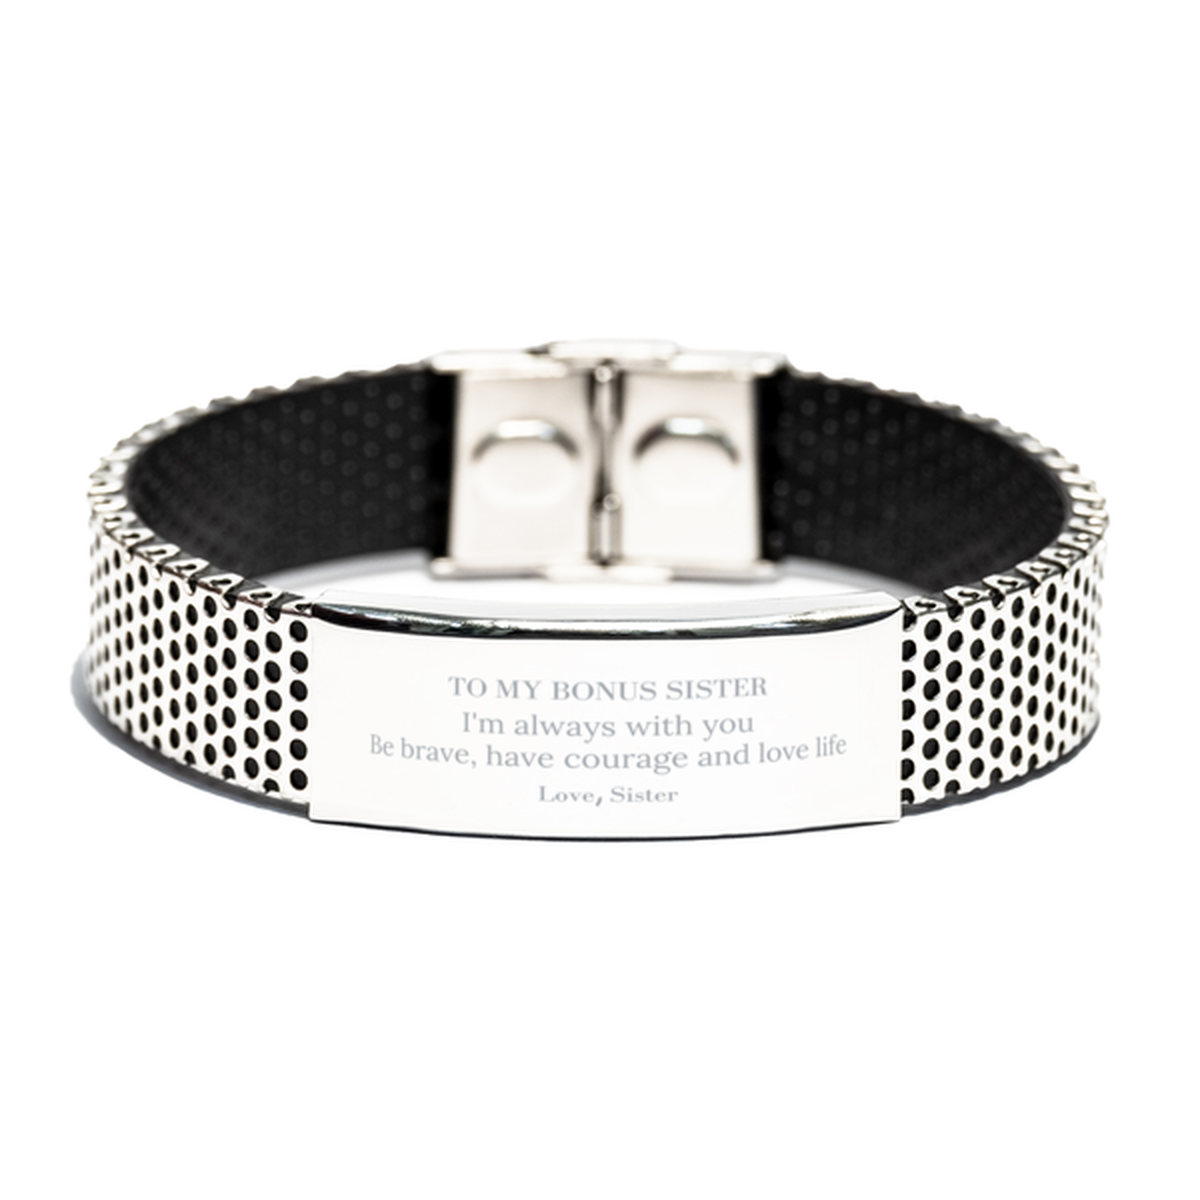 To My Bonus Sister Gifts from Sister, Unique Stainless Steel Bracelet Inspirational Christmas Birthday Graduation Gifts for Bonus Sister I'm always with you. Be brave, have courage and love life. Love, Sister